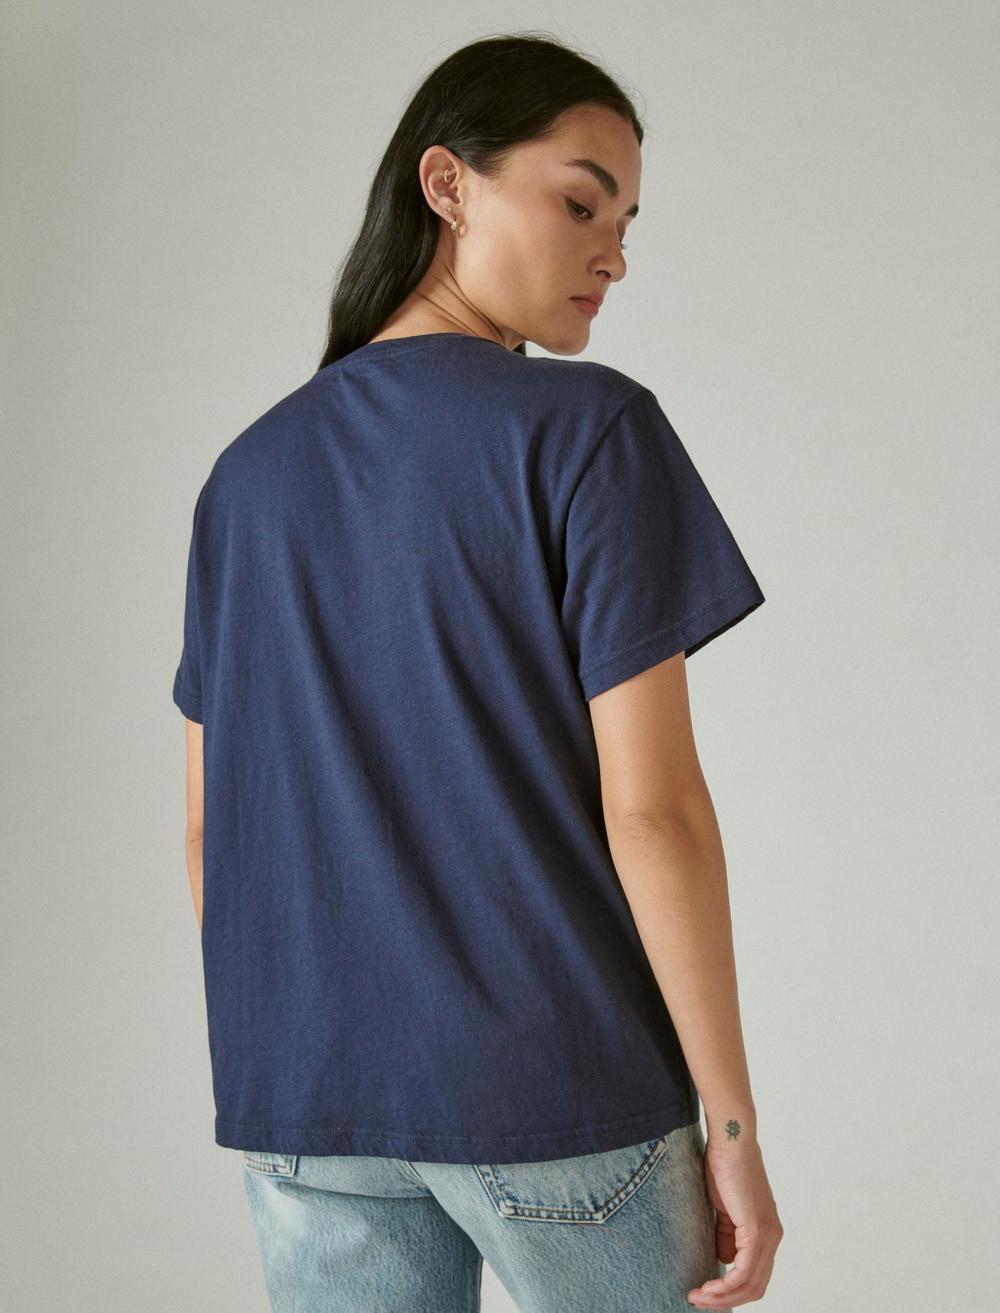 EMBROIDERED LUCKY BOYFRIEND TEE, image 4